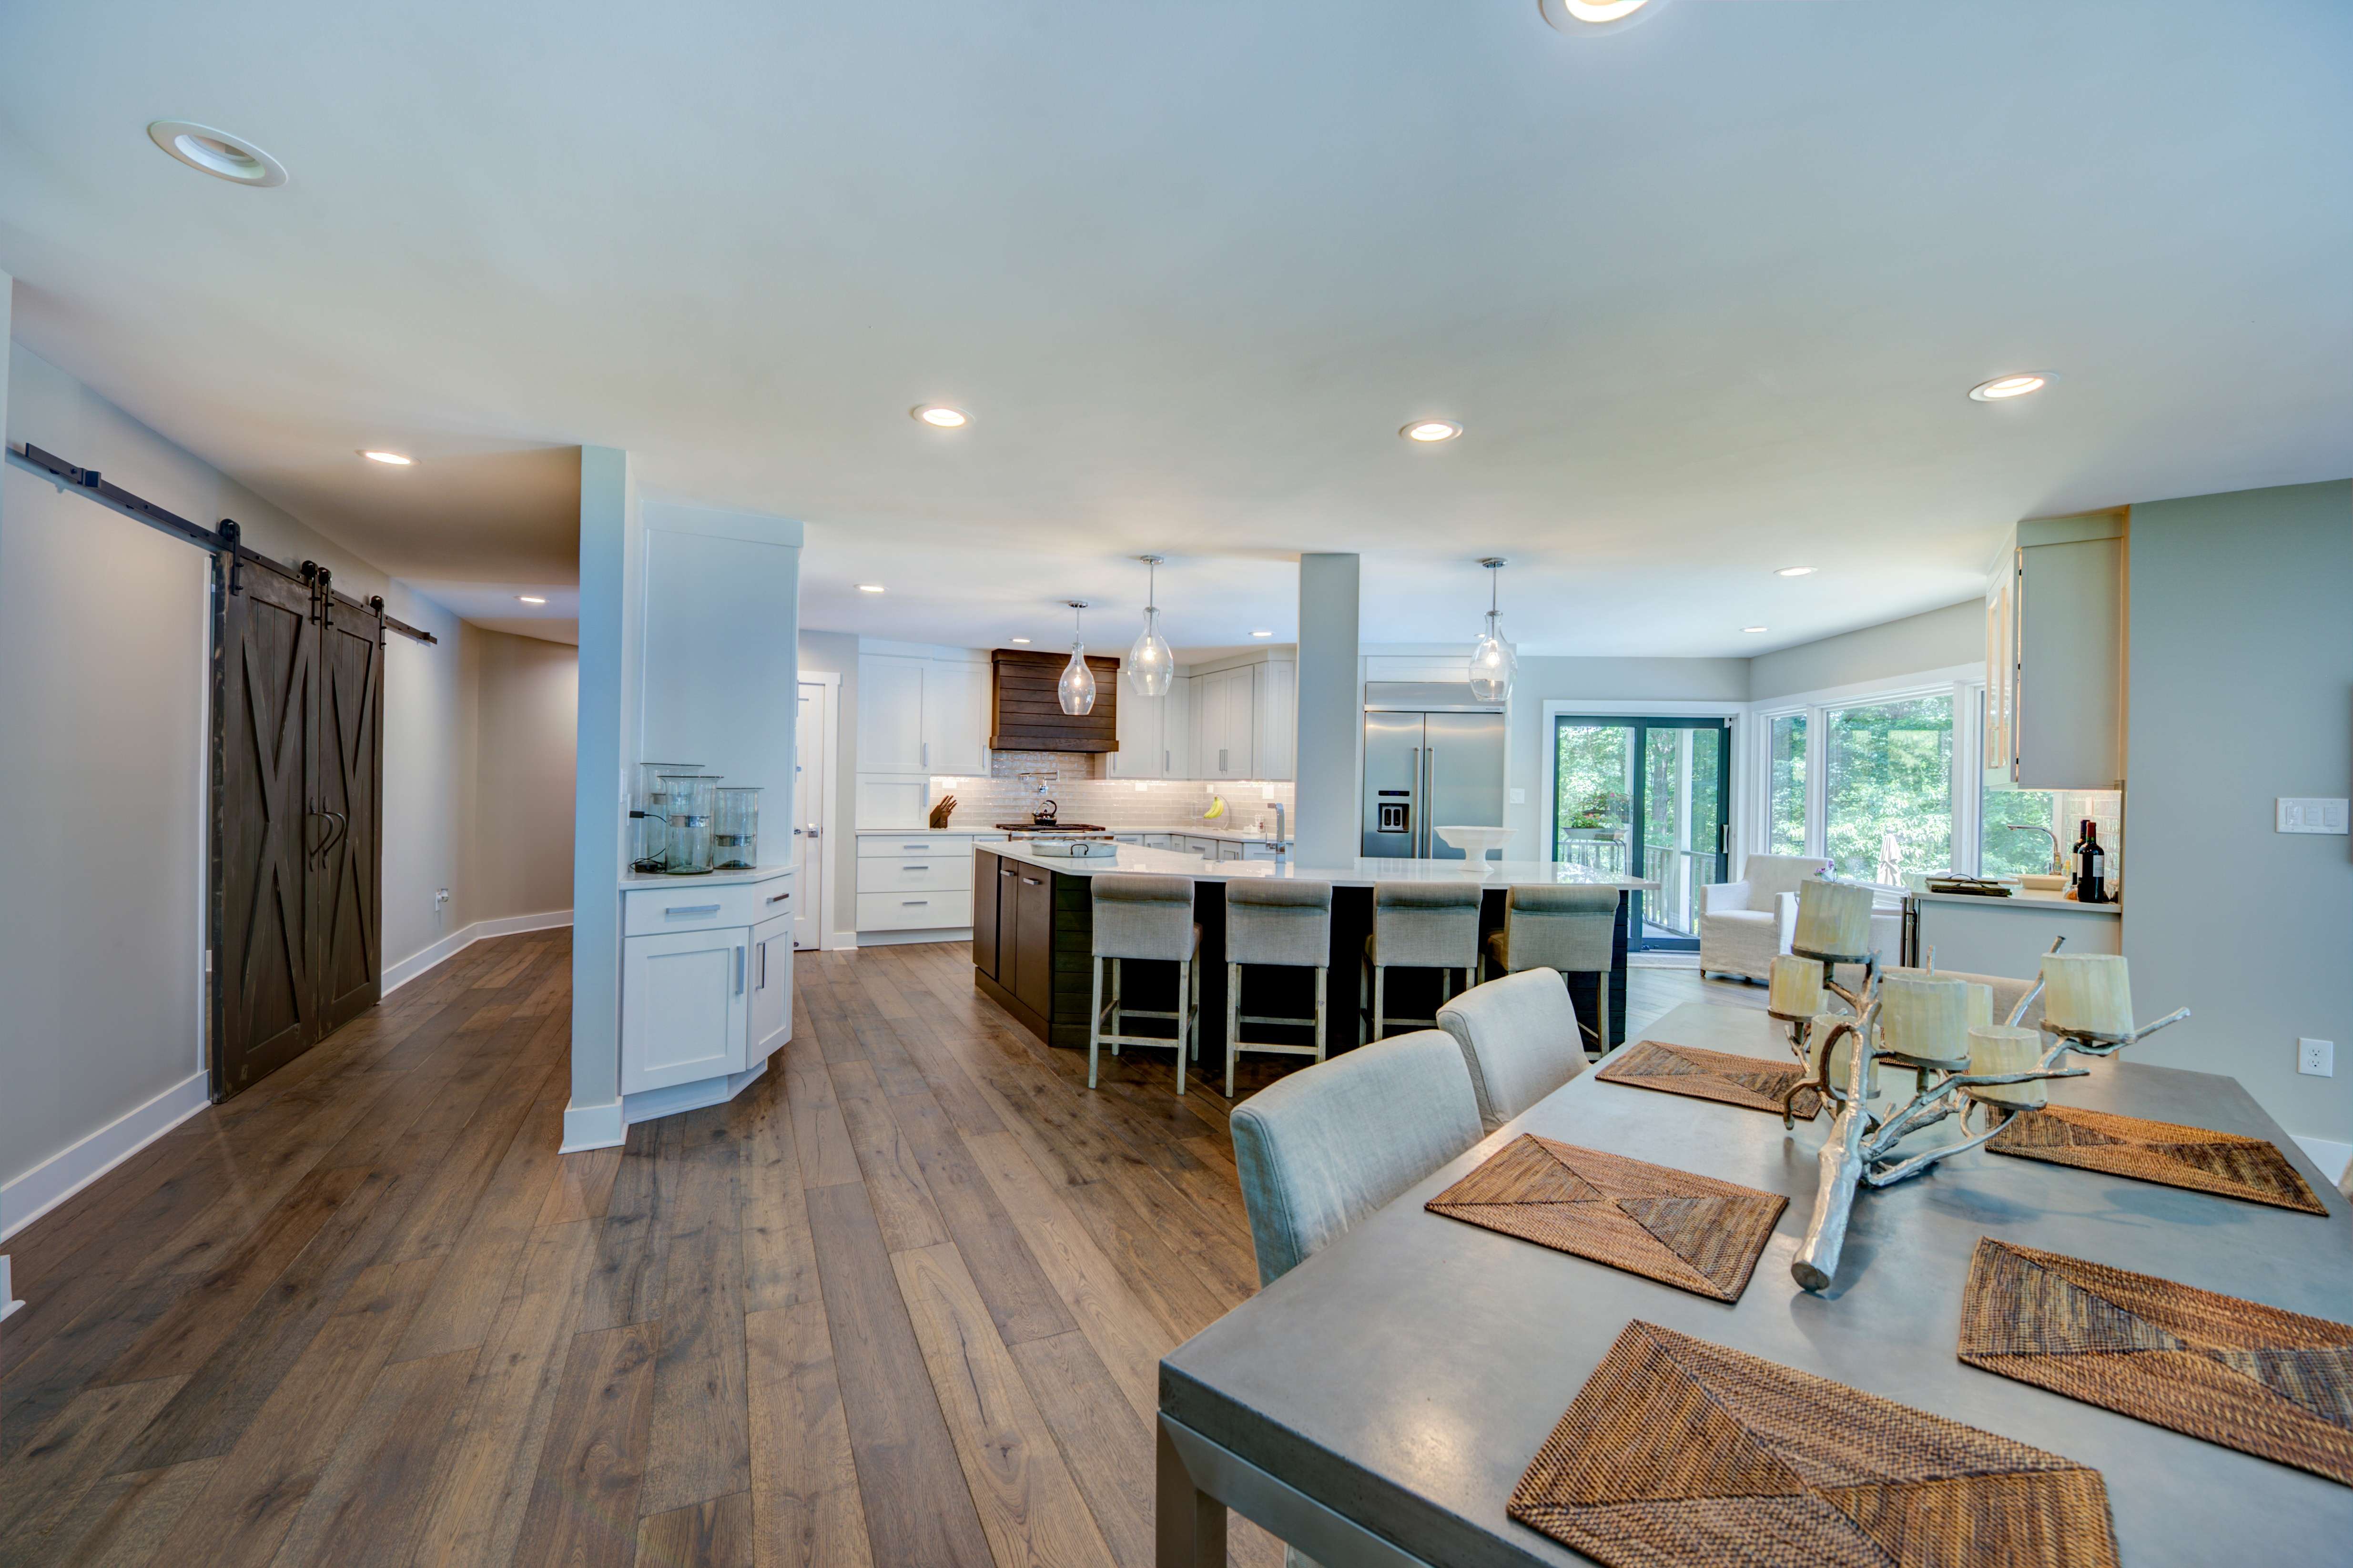 Open spacious kitchen with dining table and kitchen island seating